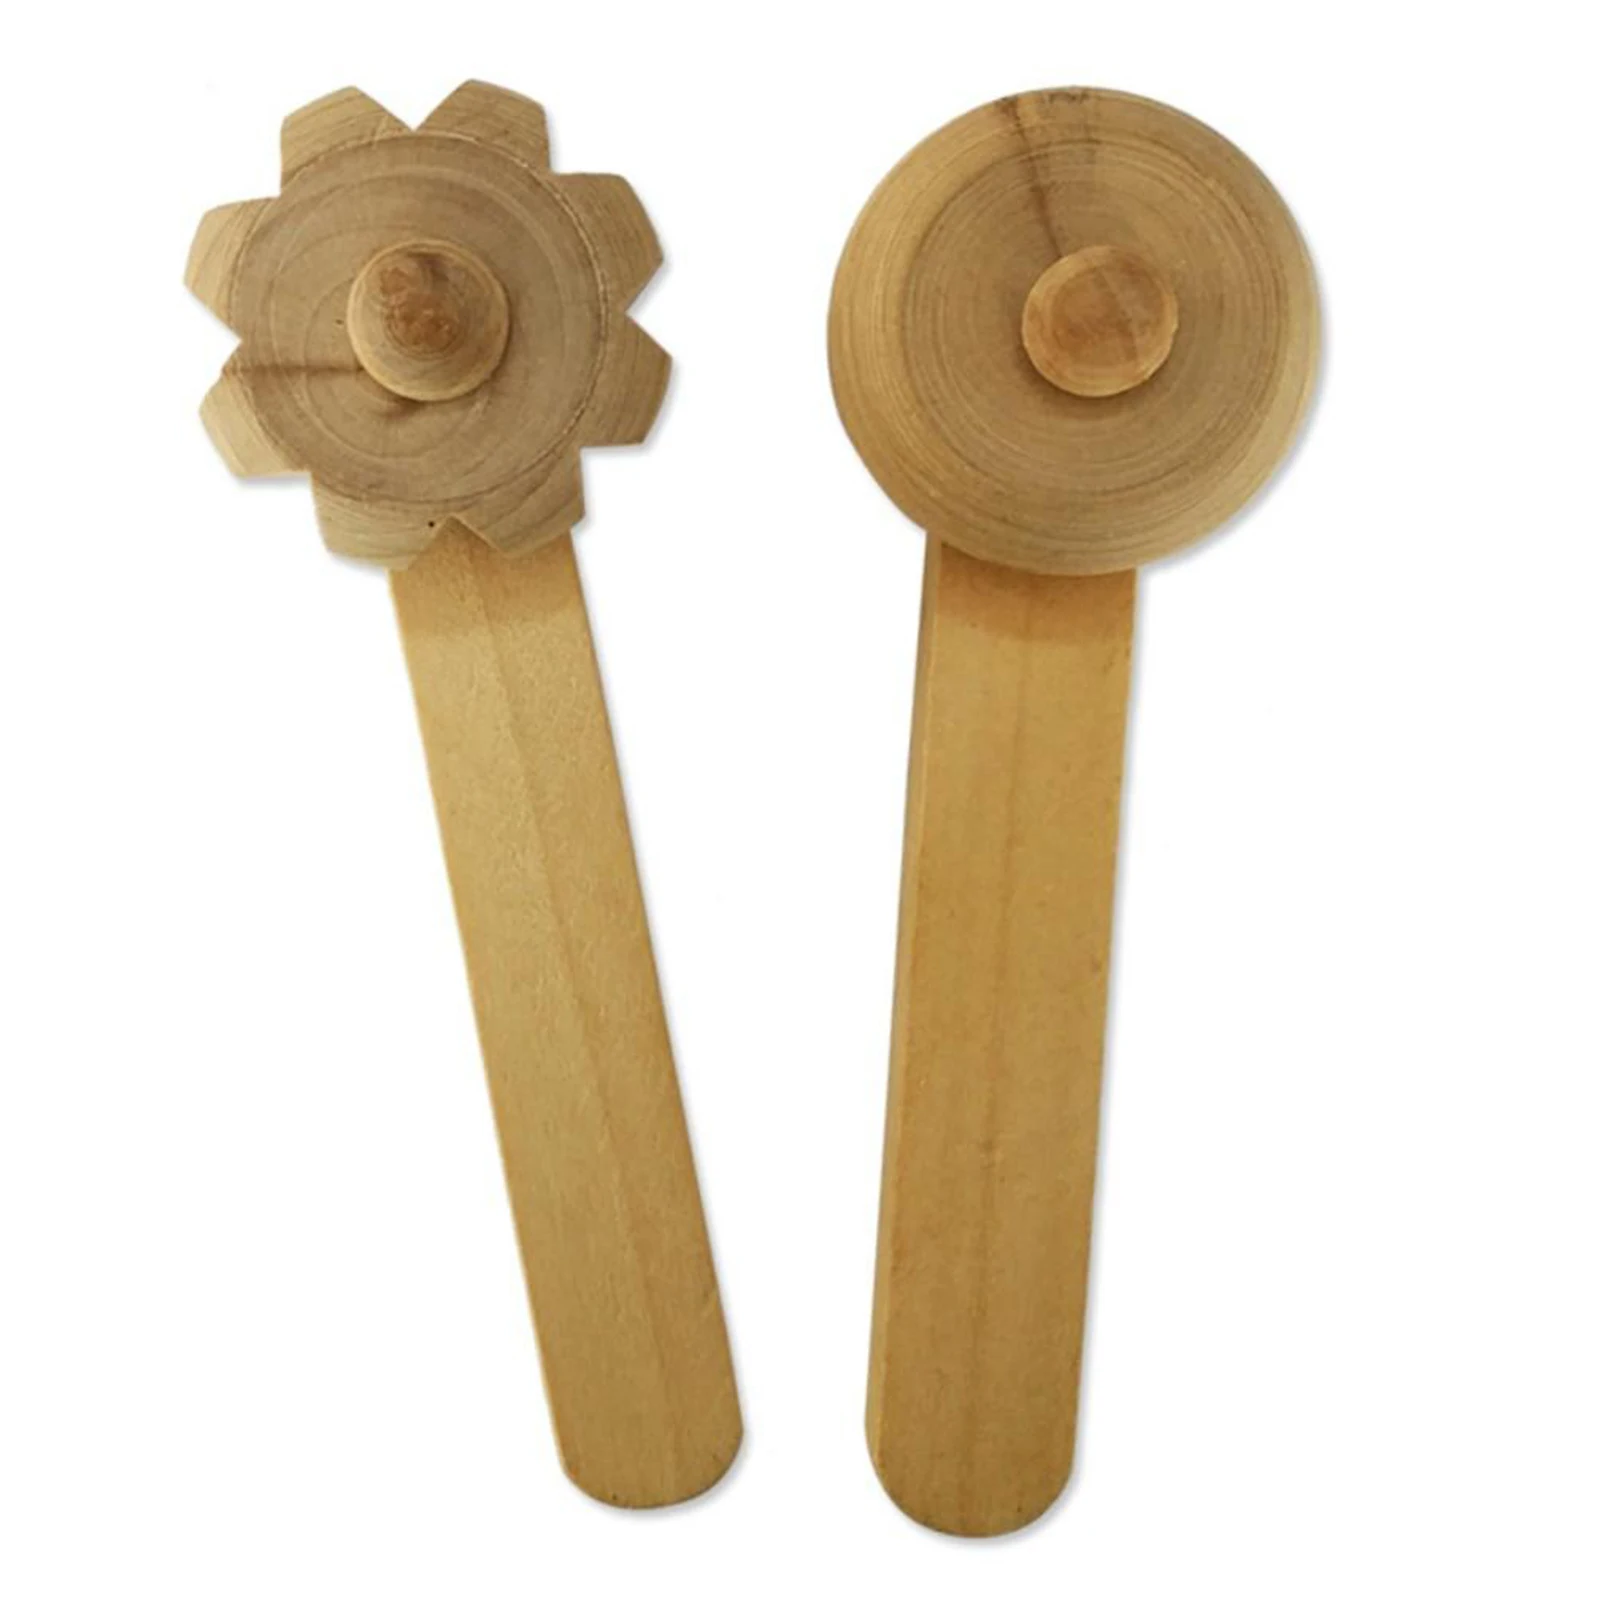 Wood Art Clay Dough Tools Toy Slime Mold Roller Pin Handmade  Supplies Baking Accessories Age 3-6 Years